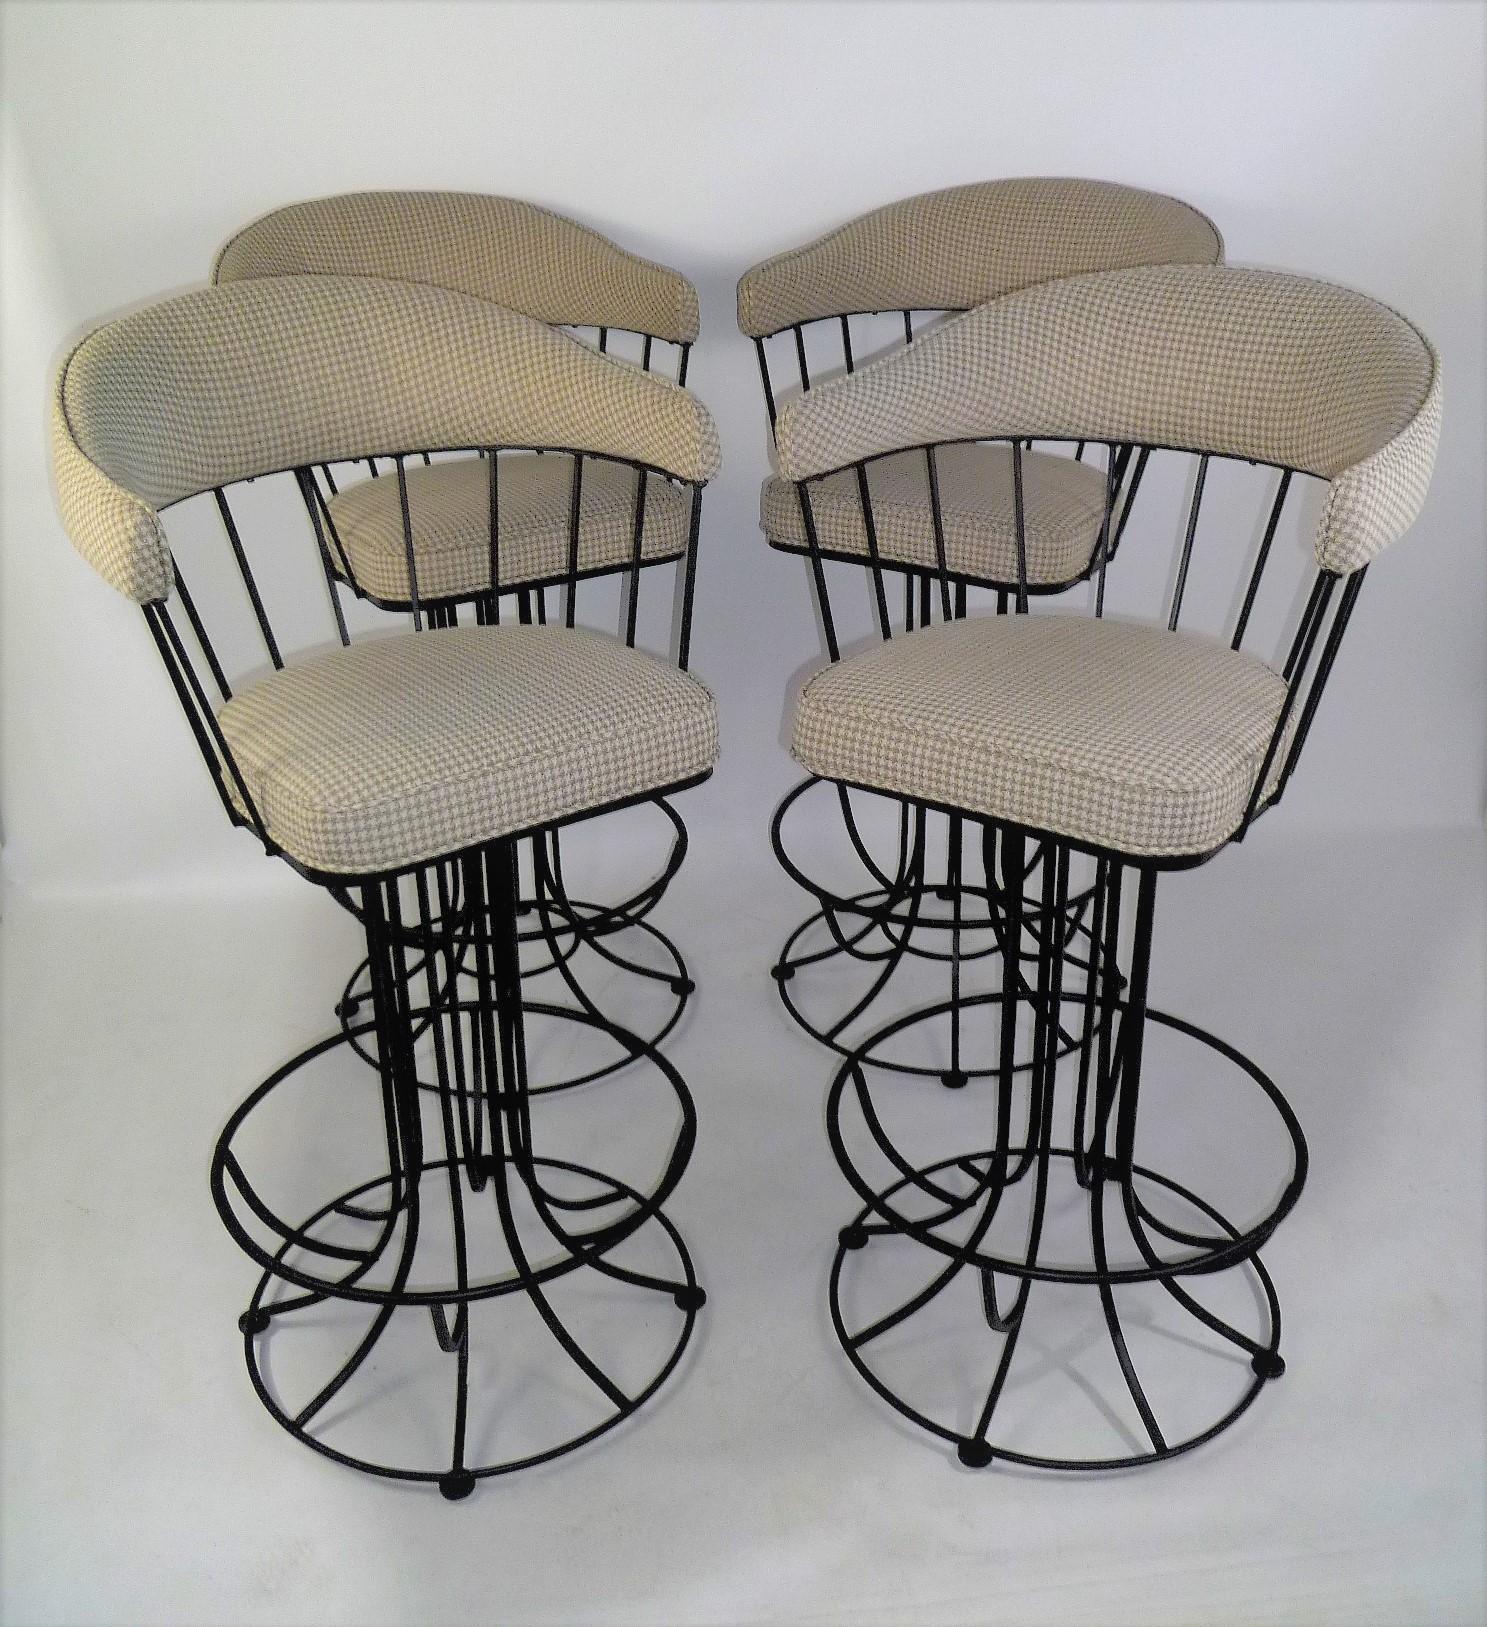 Wonderful 1960s swiveling barstools reminiscent of the shape and style created by Anton Lorenz. In shaped blackened iron, they have a circular design from the spindle back down to the bases. Freshly upholstered curved back and arms and seat in a